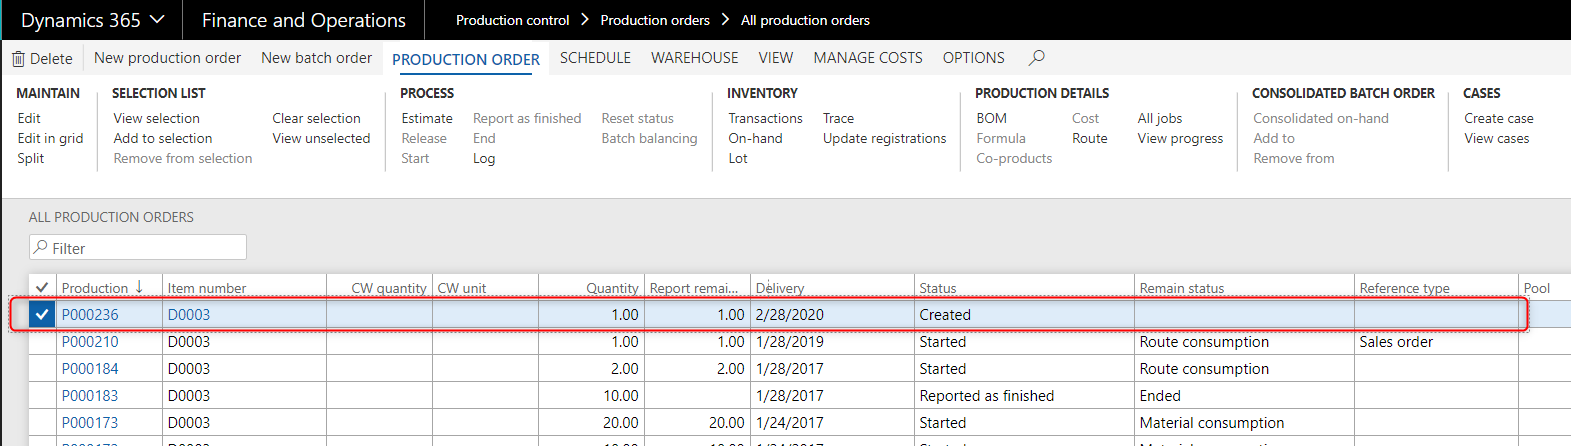 Dynamics 365 Work Policies production codes